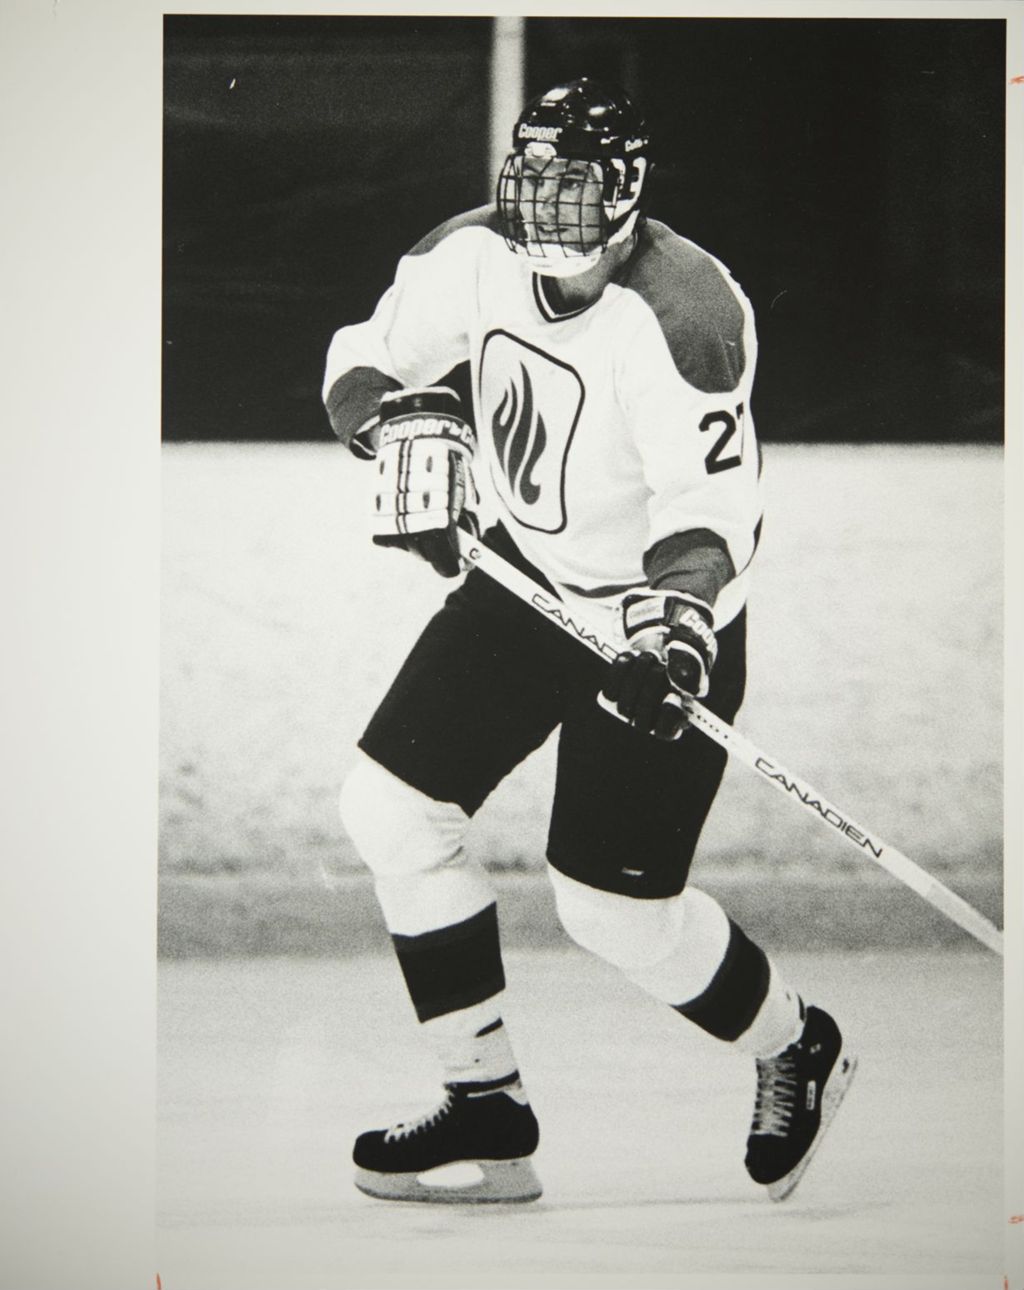 Player on the University of Illinois at Chicago hockey team